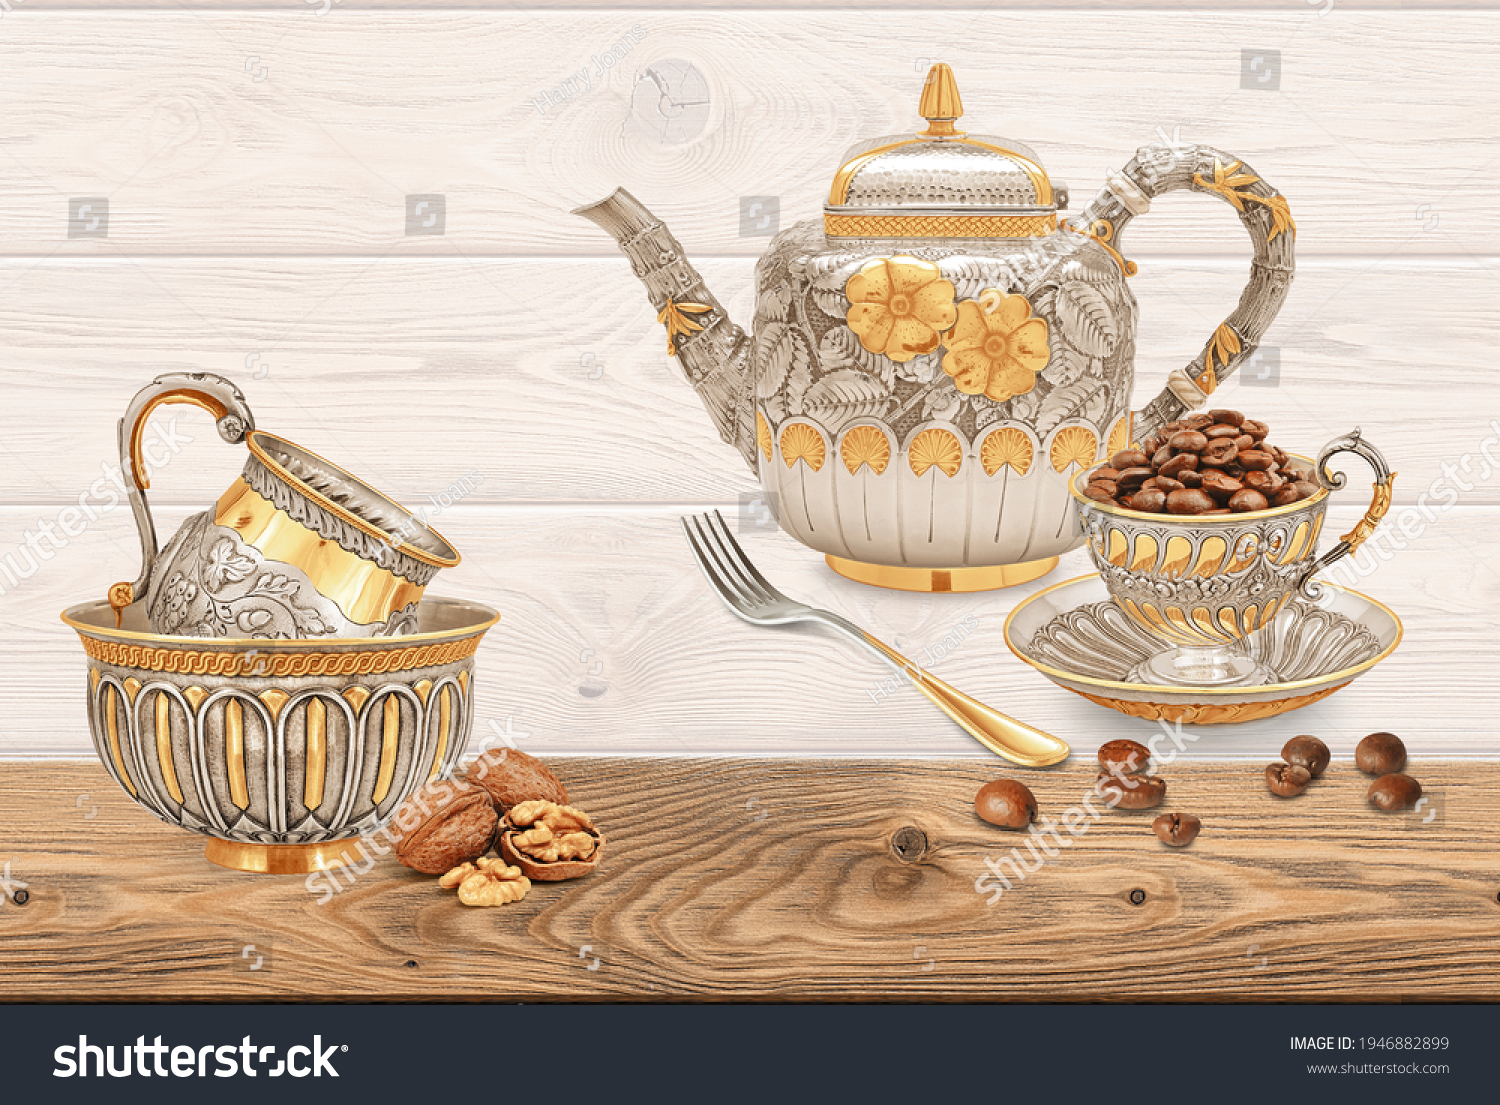 Wooden background with Gold Cups and teapot with coffee and spoon kitchen set #1946882899